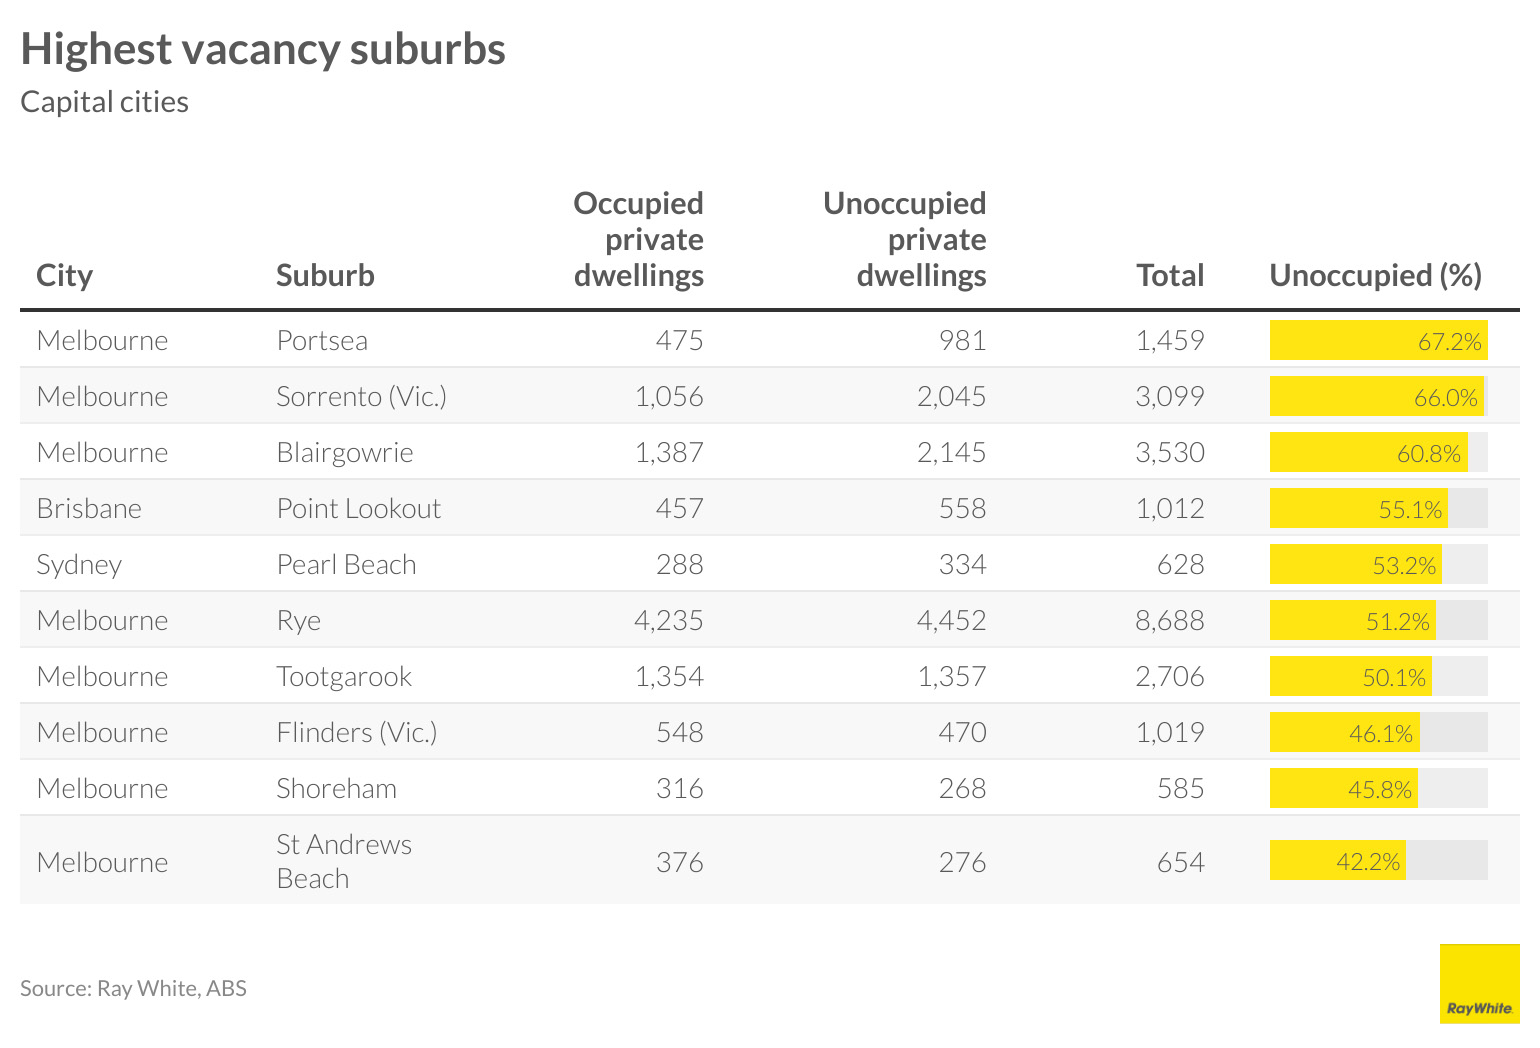 Highest vacancy suburbs nationally, from census data crunched by Ray White.